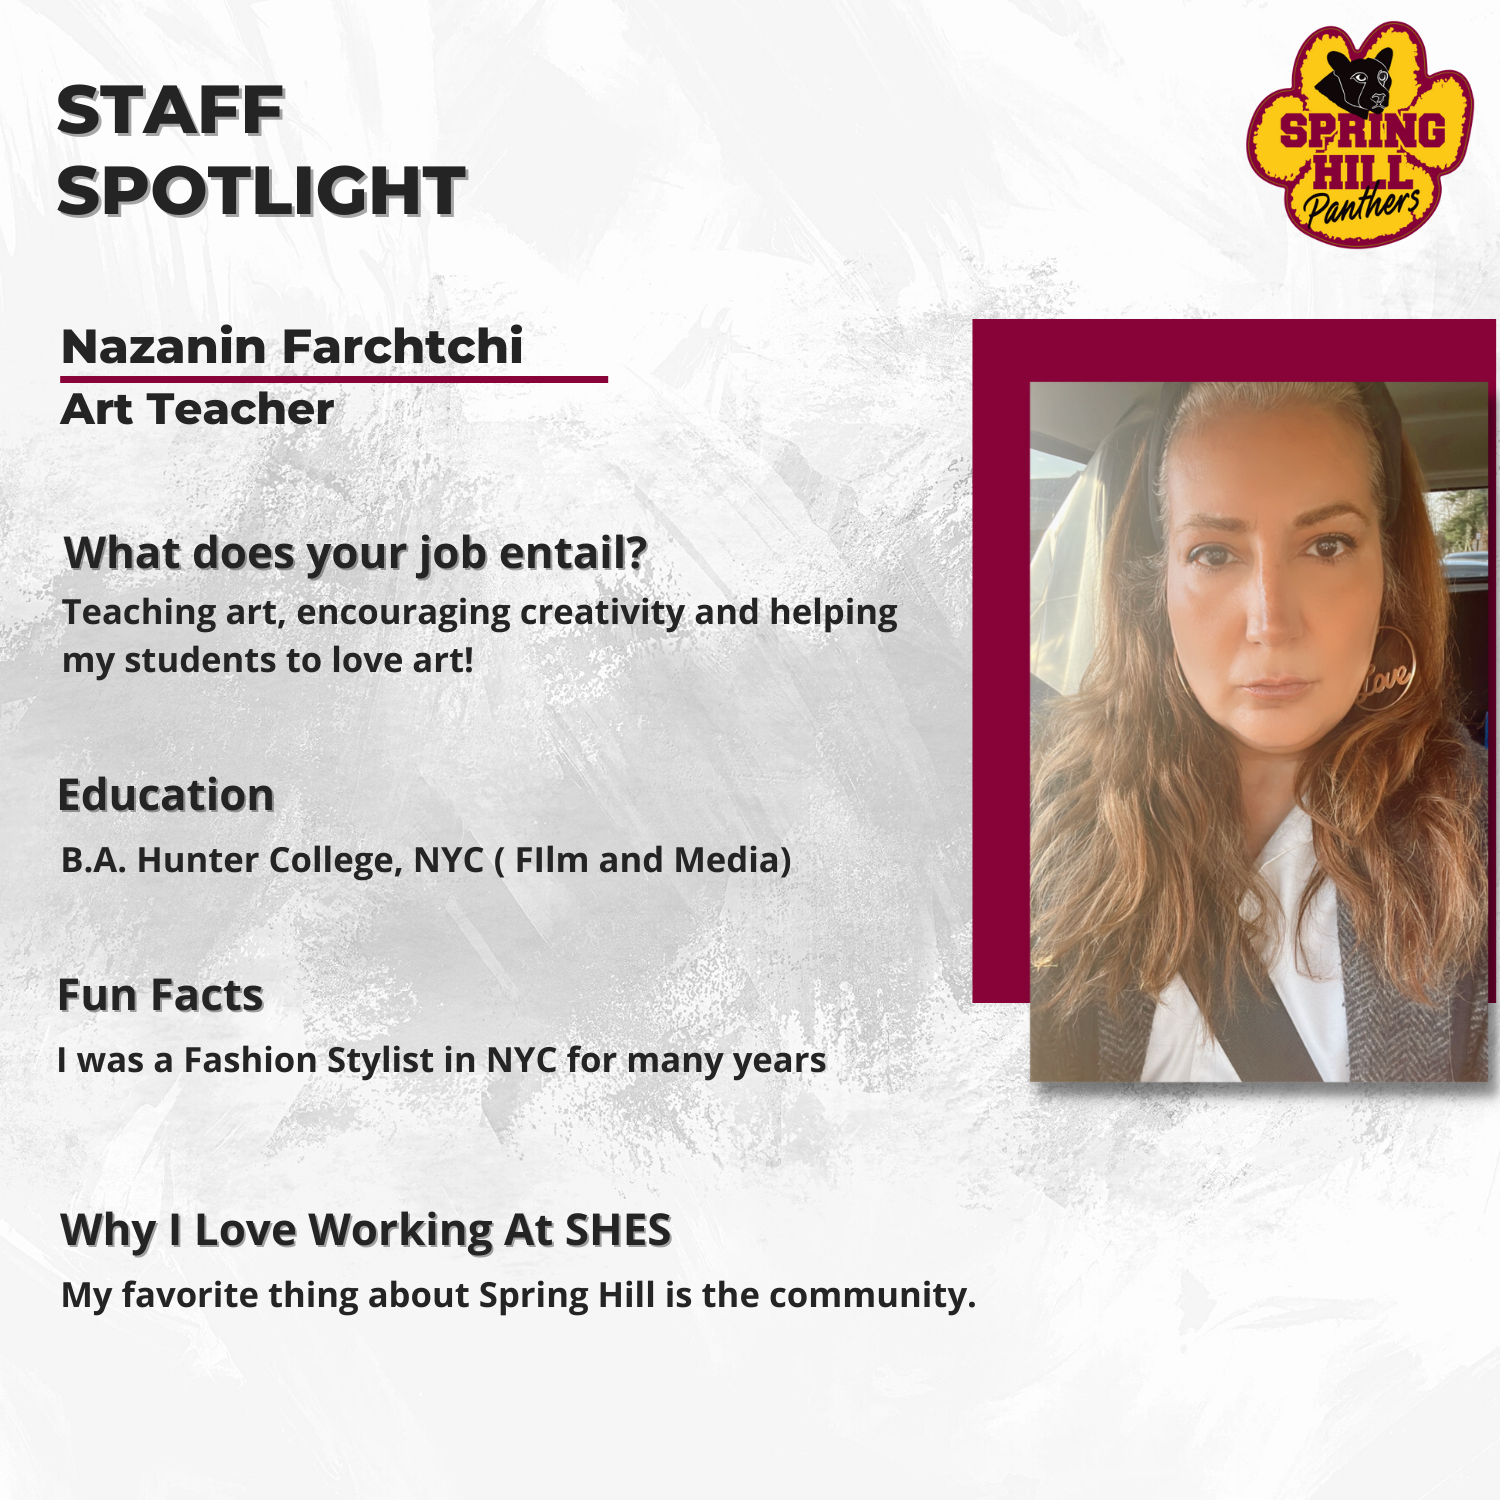 Nazanin Farchtchi Art Teacher; Teaching art, encouraging creativity and helping my students to love art!; B.A. Hunter College, NYC ( FIlm and Media); I was a Fashion Stylist in NYC for many years; My favorite thing about Spring Hill is the community.